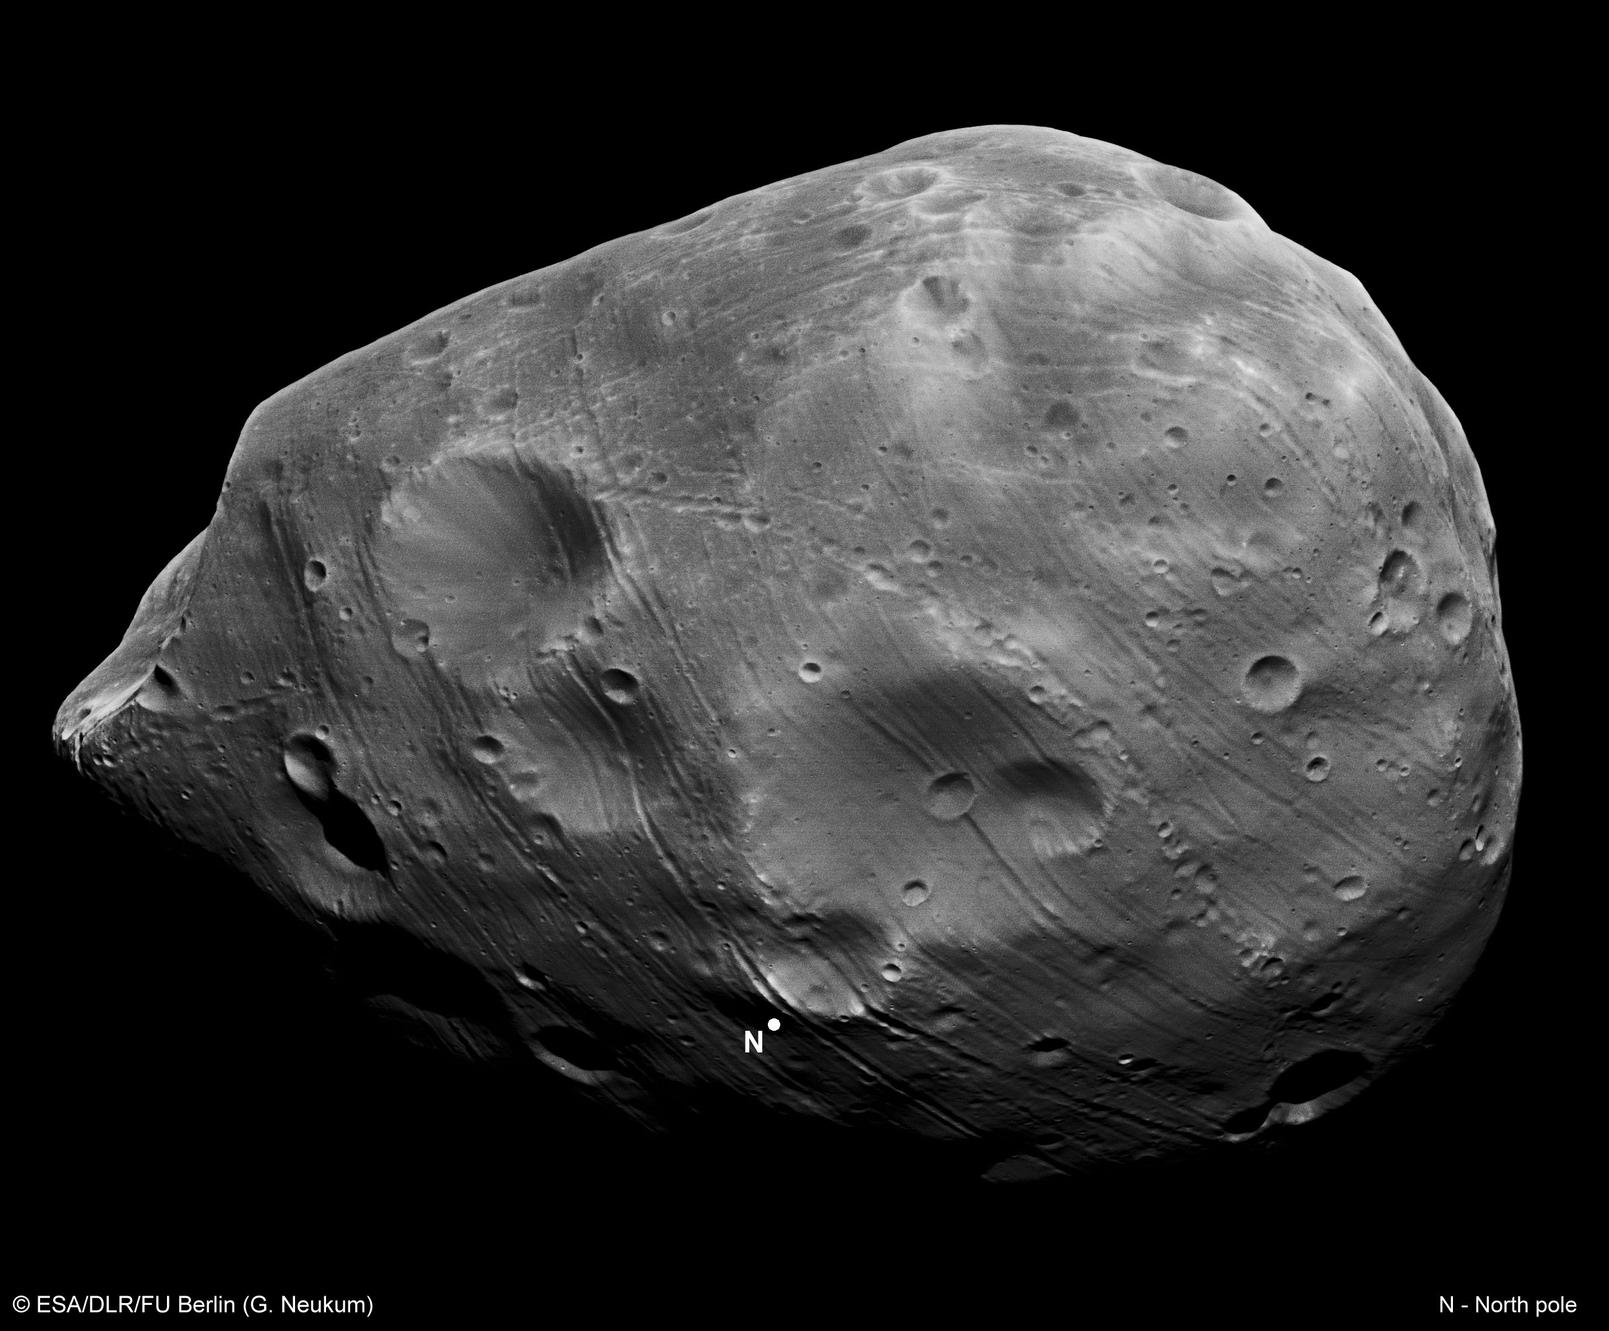 The origin of Phobos, the larger of the two moons orbiting Mars, remains unknown. 